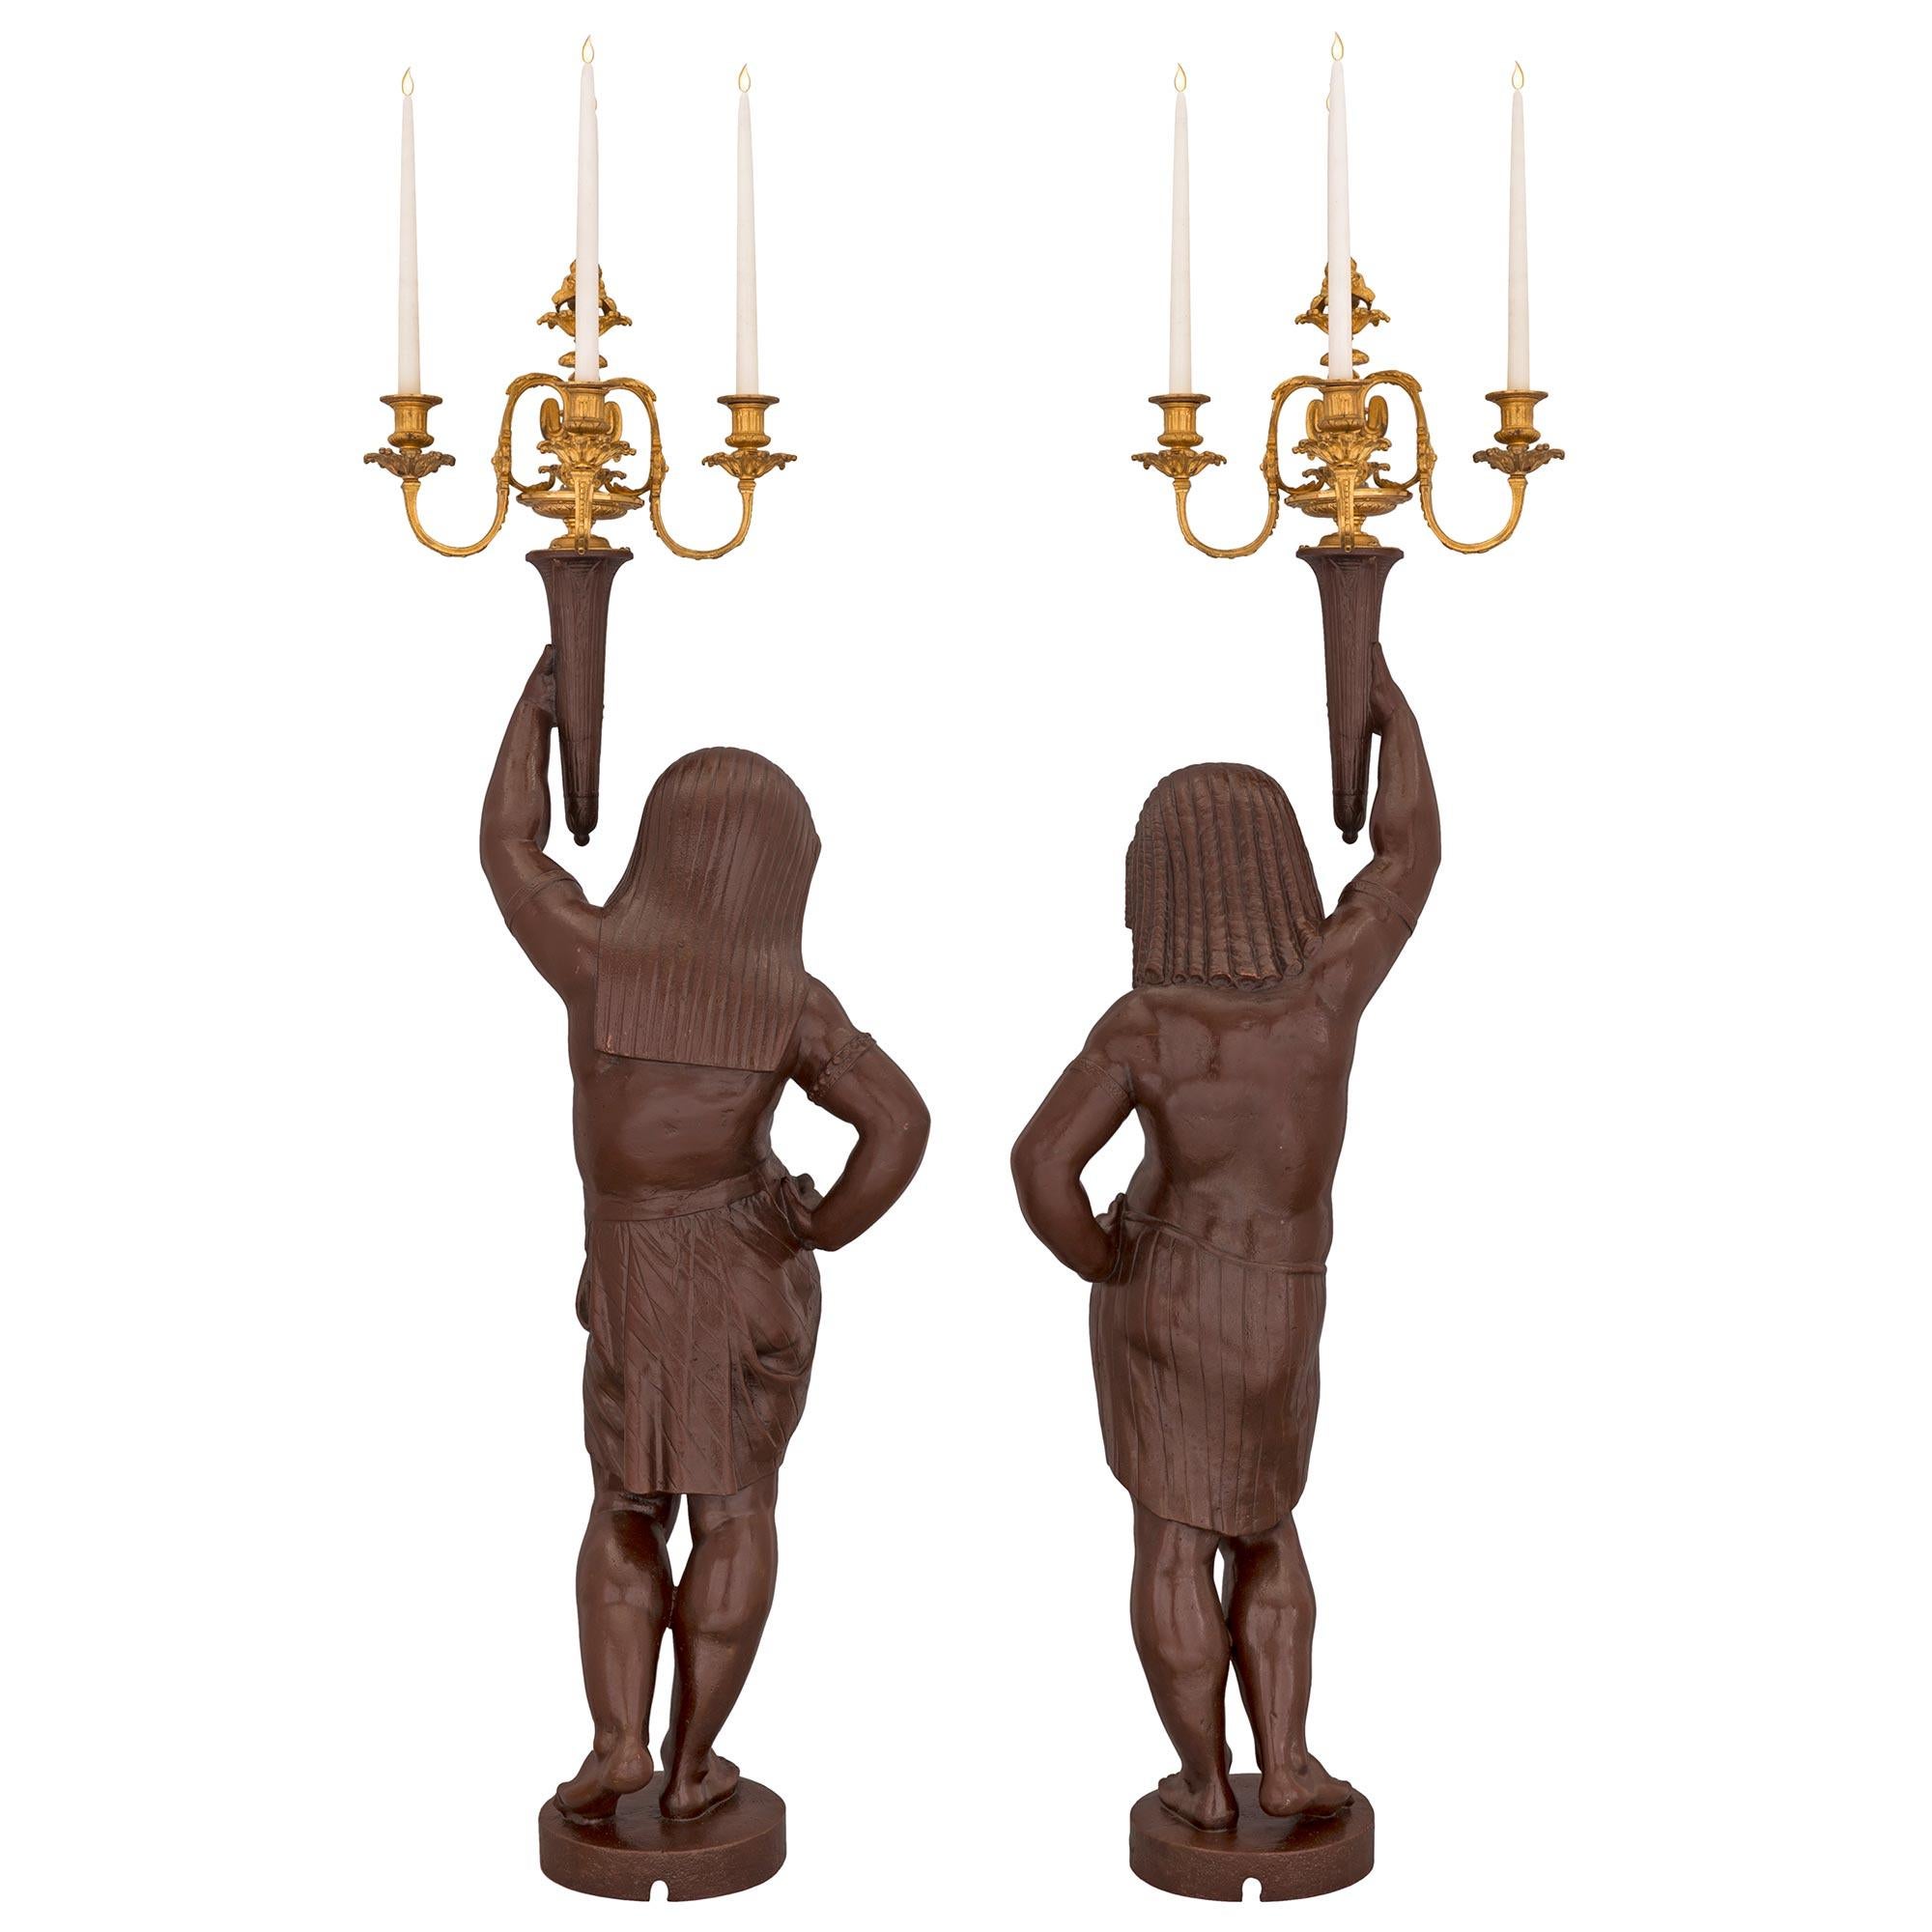 Pair of French Mid-19th Century Patinated Bronze and Ormolu Candelabra Statues For Sale 8